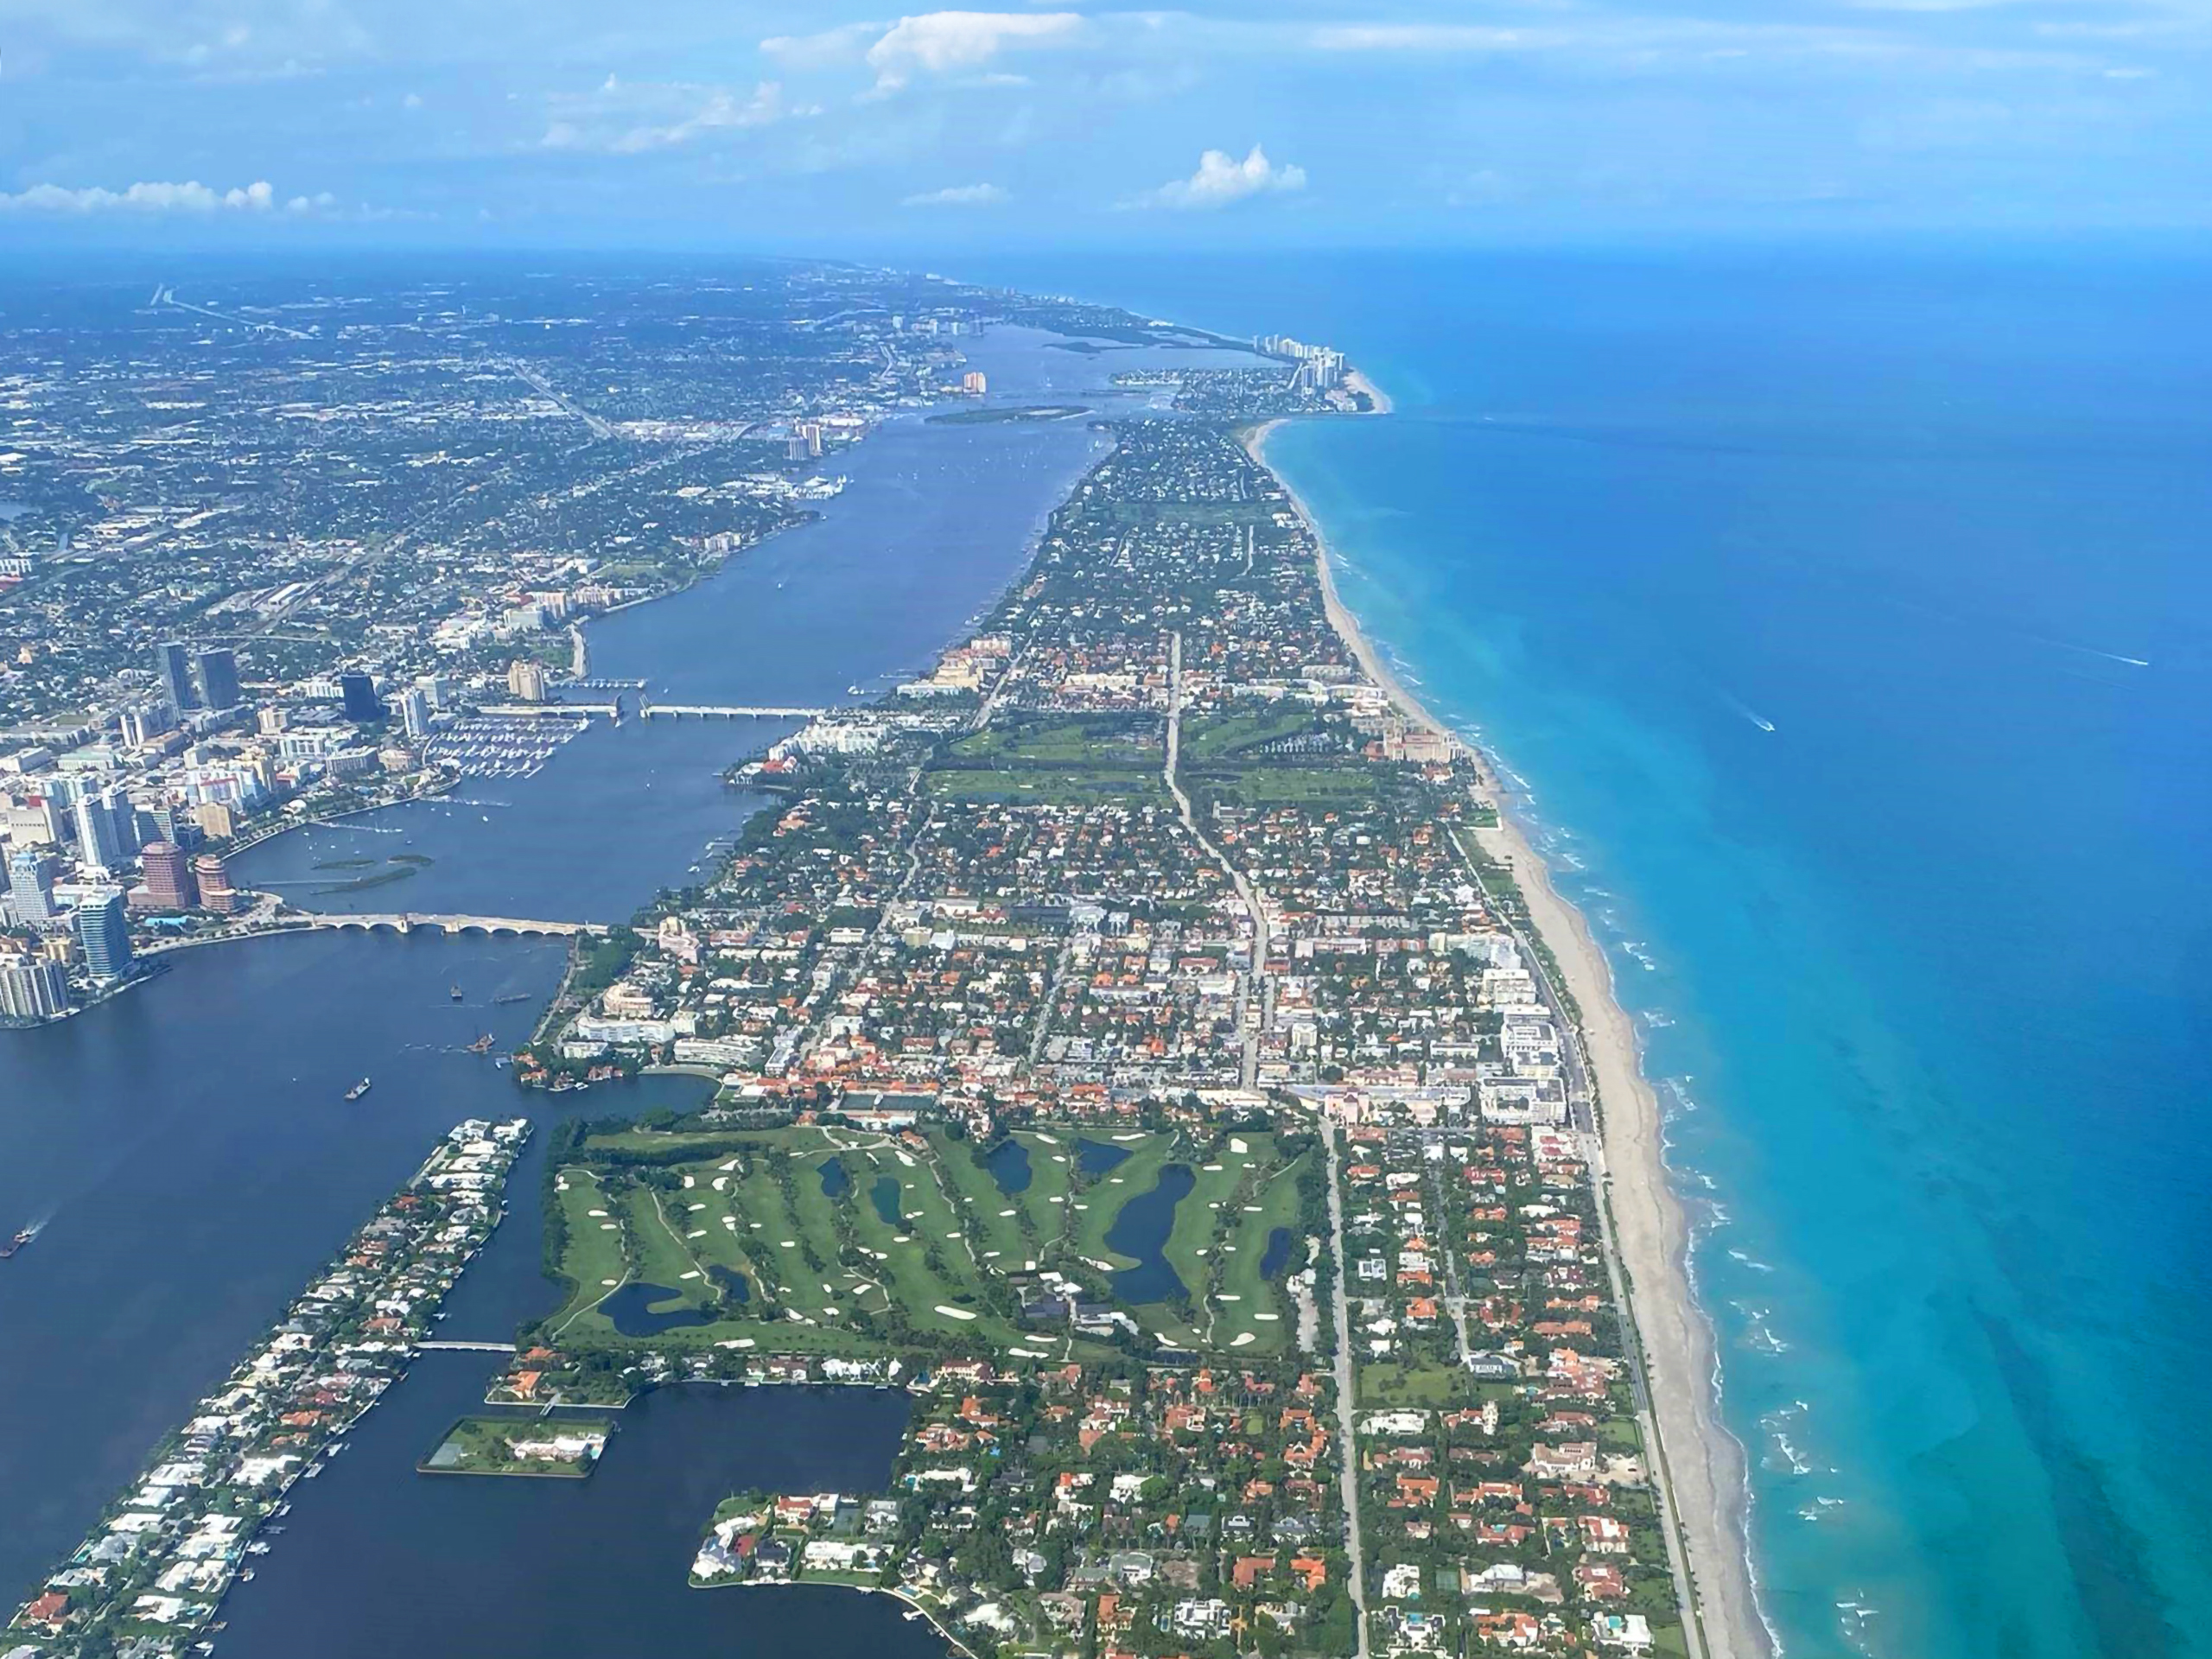 Palm Beach Claims the Crown as America’s Premier Residential Trophy Market